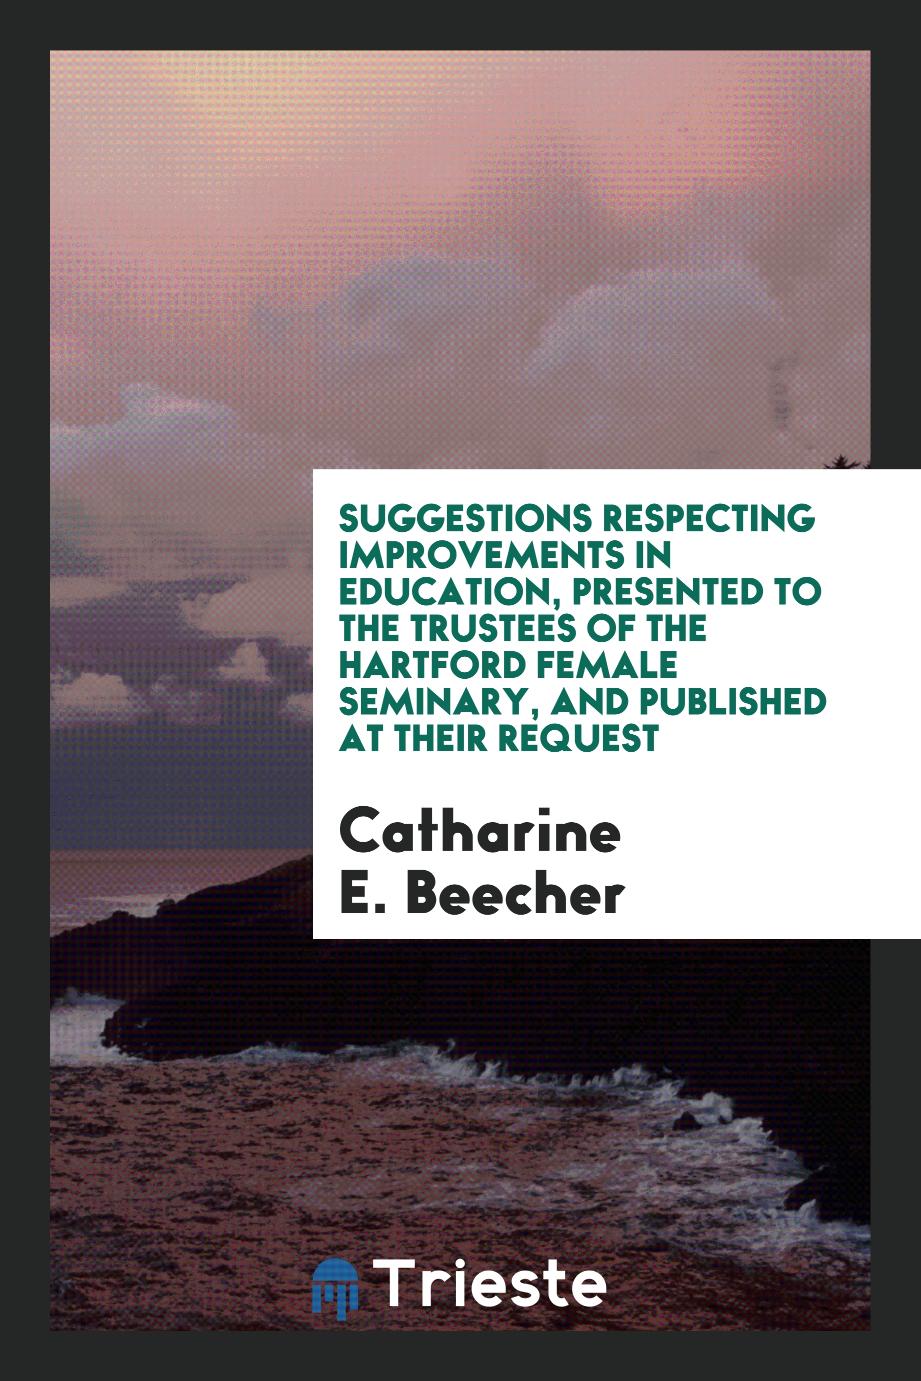 Suggestions Respecting Improvements in Education, Presented to the Trustees of the Hartford Female Seminary, and Published at Their Request